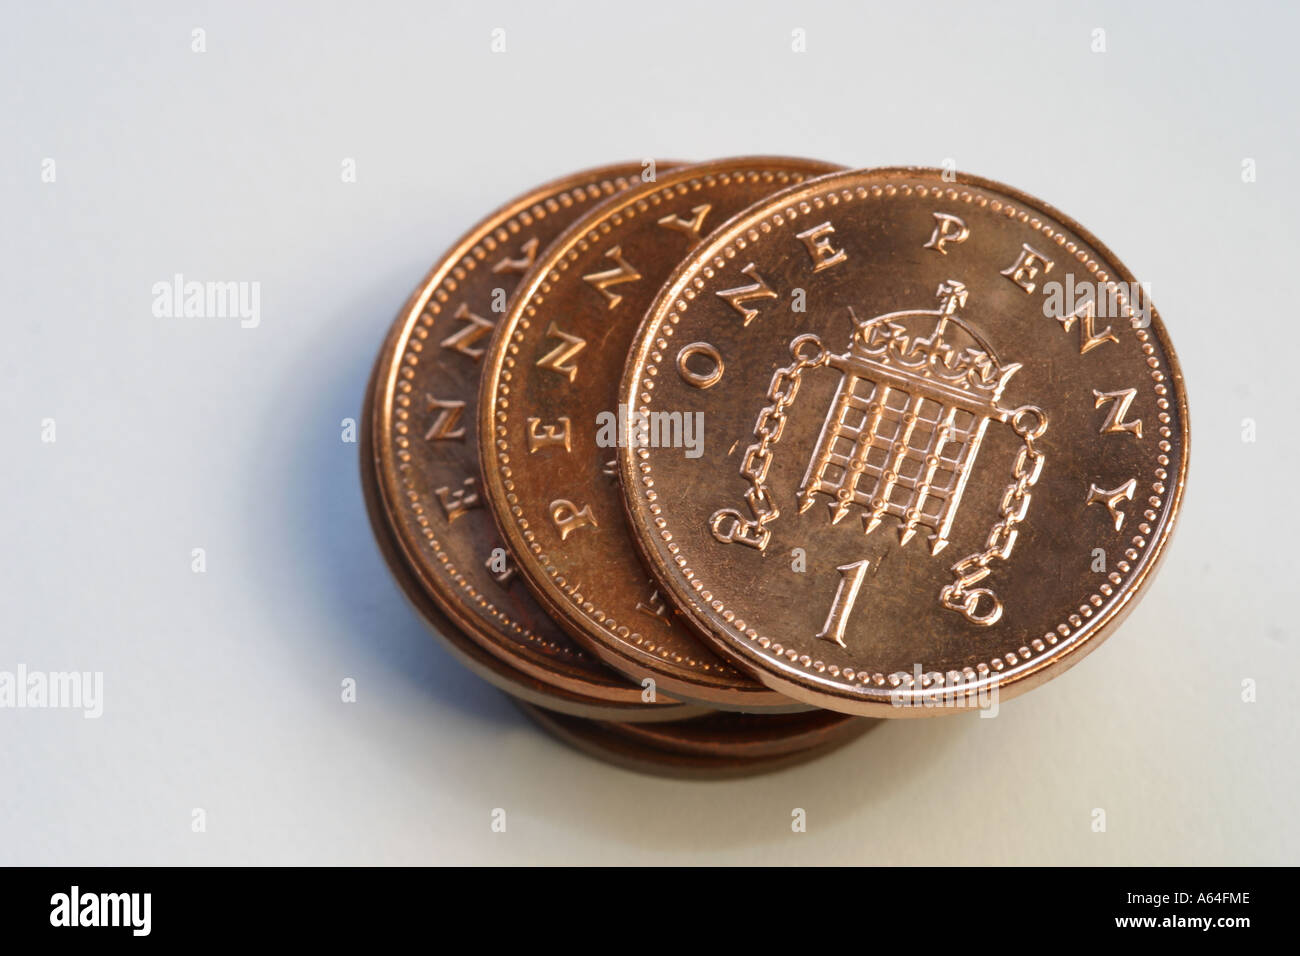 Pennies small change coin money cash Stock Photo